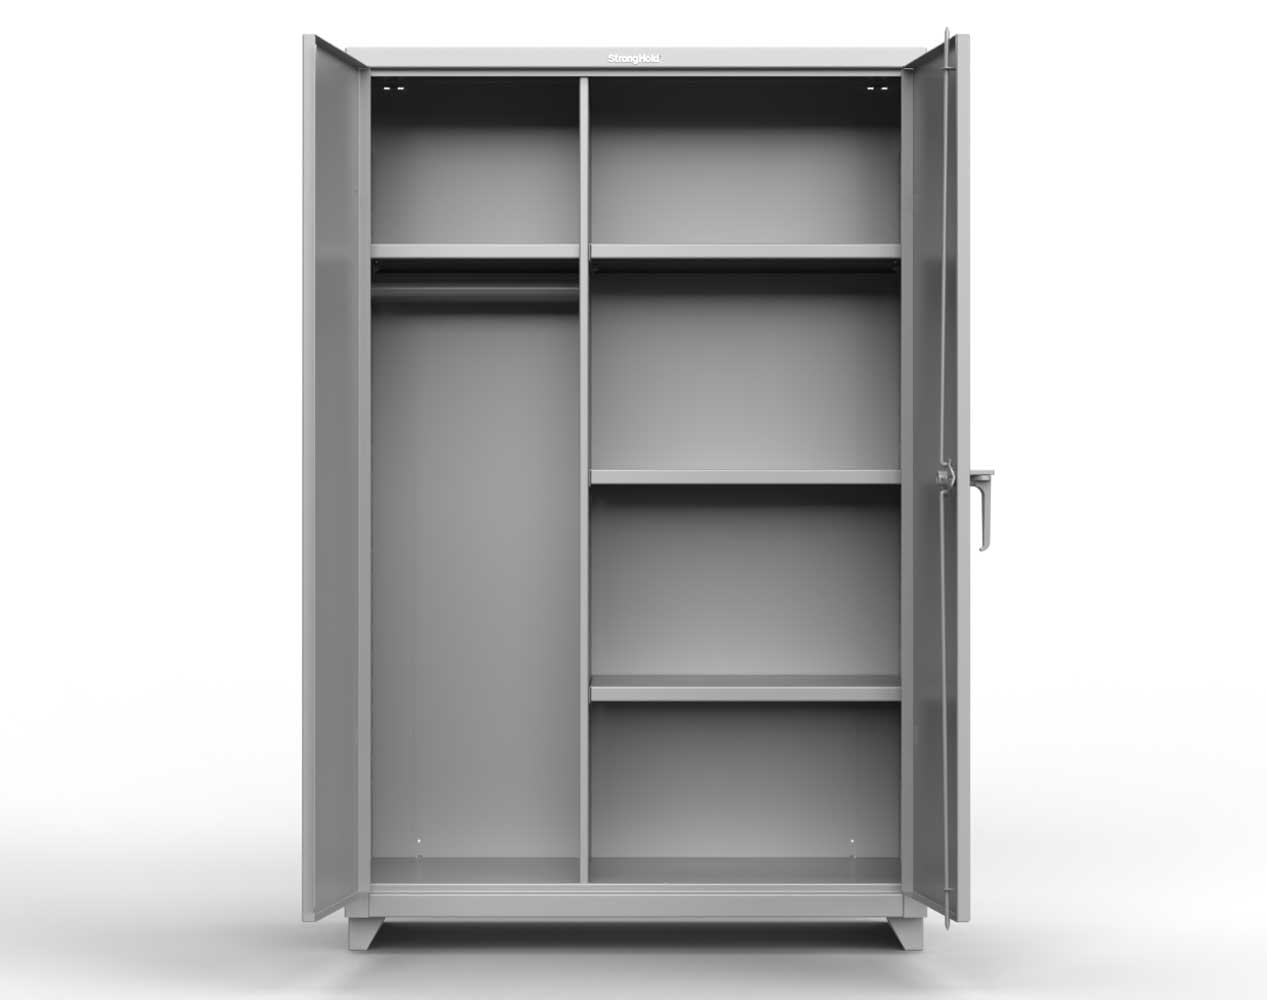 Extra Heavy Duty 14 GA Uniform Cabinet with 4 Shelves - 48 In. W x 24 In. D x 75 In. H